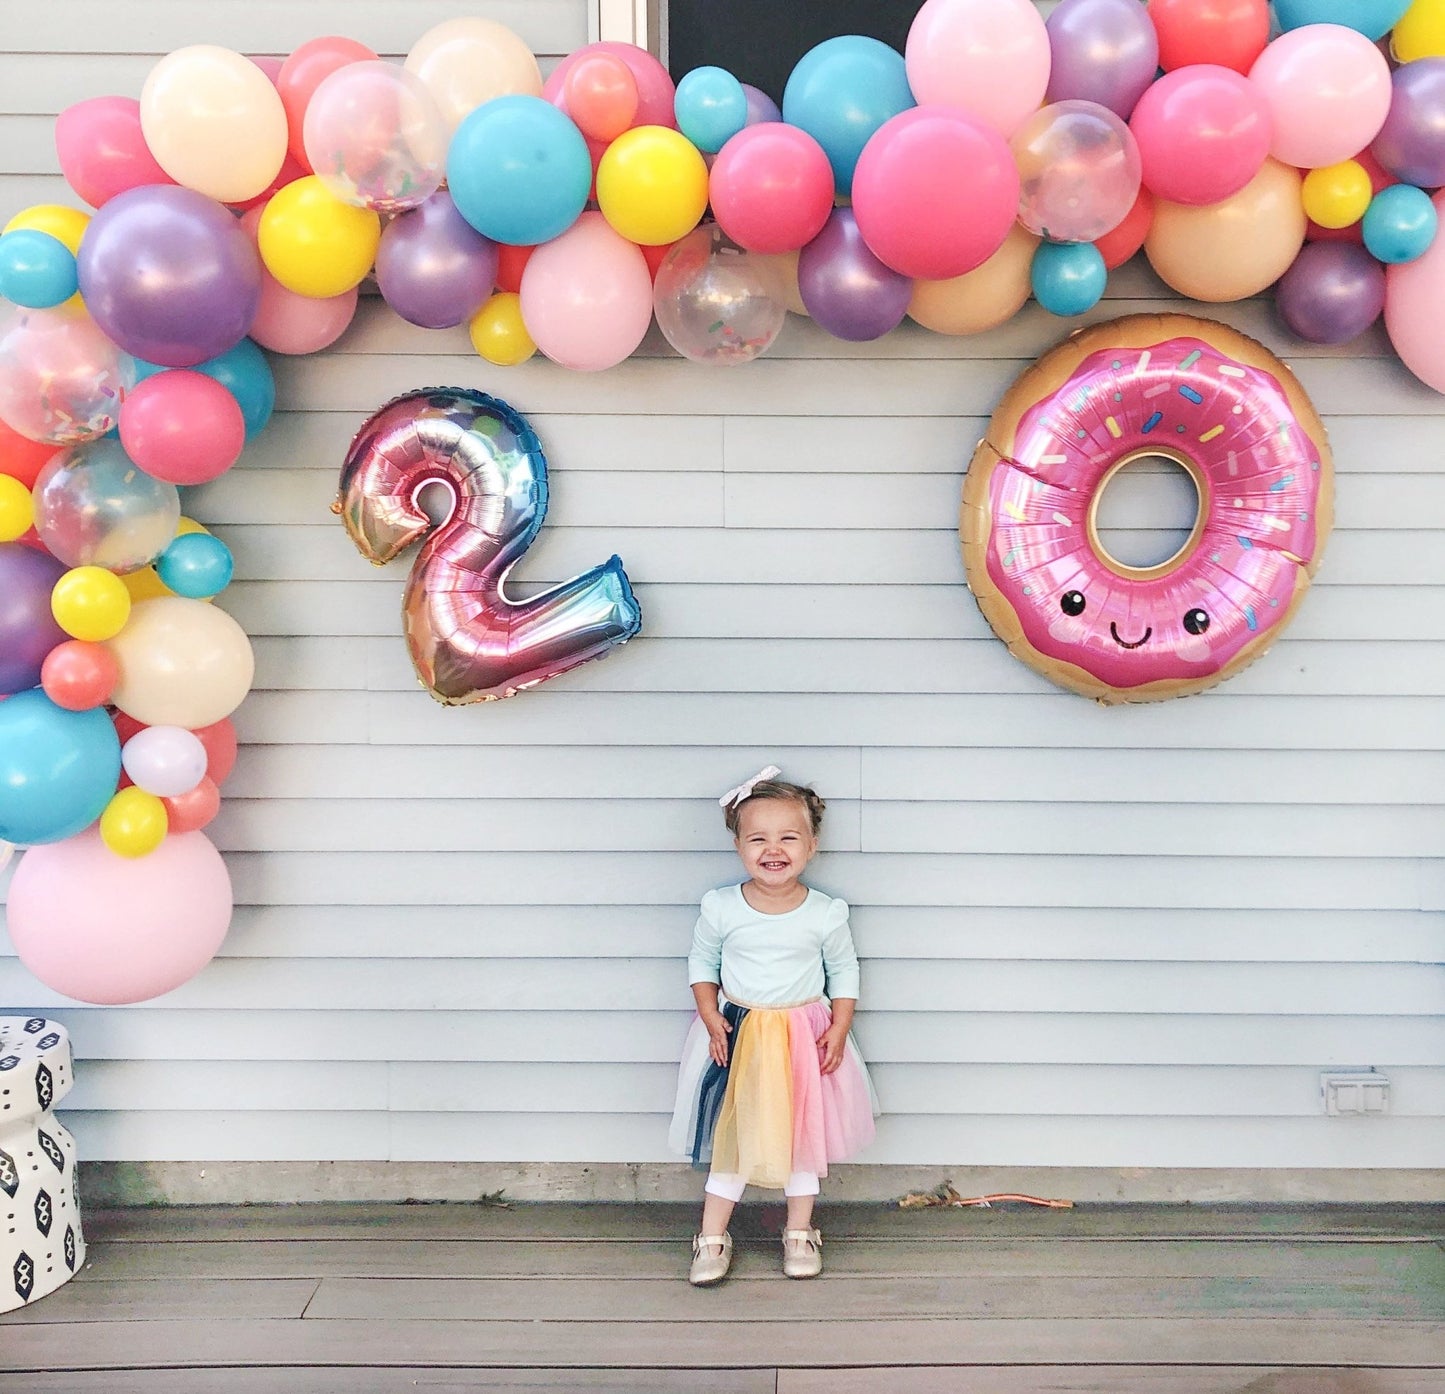 Custom Number of Colors - Ellie's Party Supply